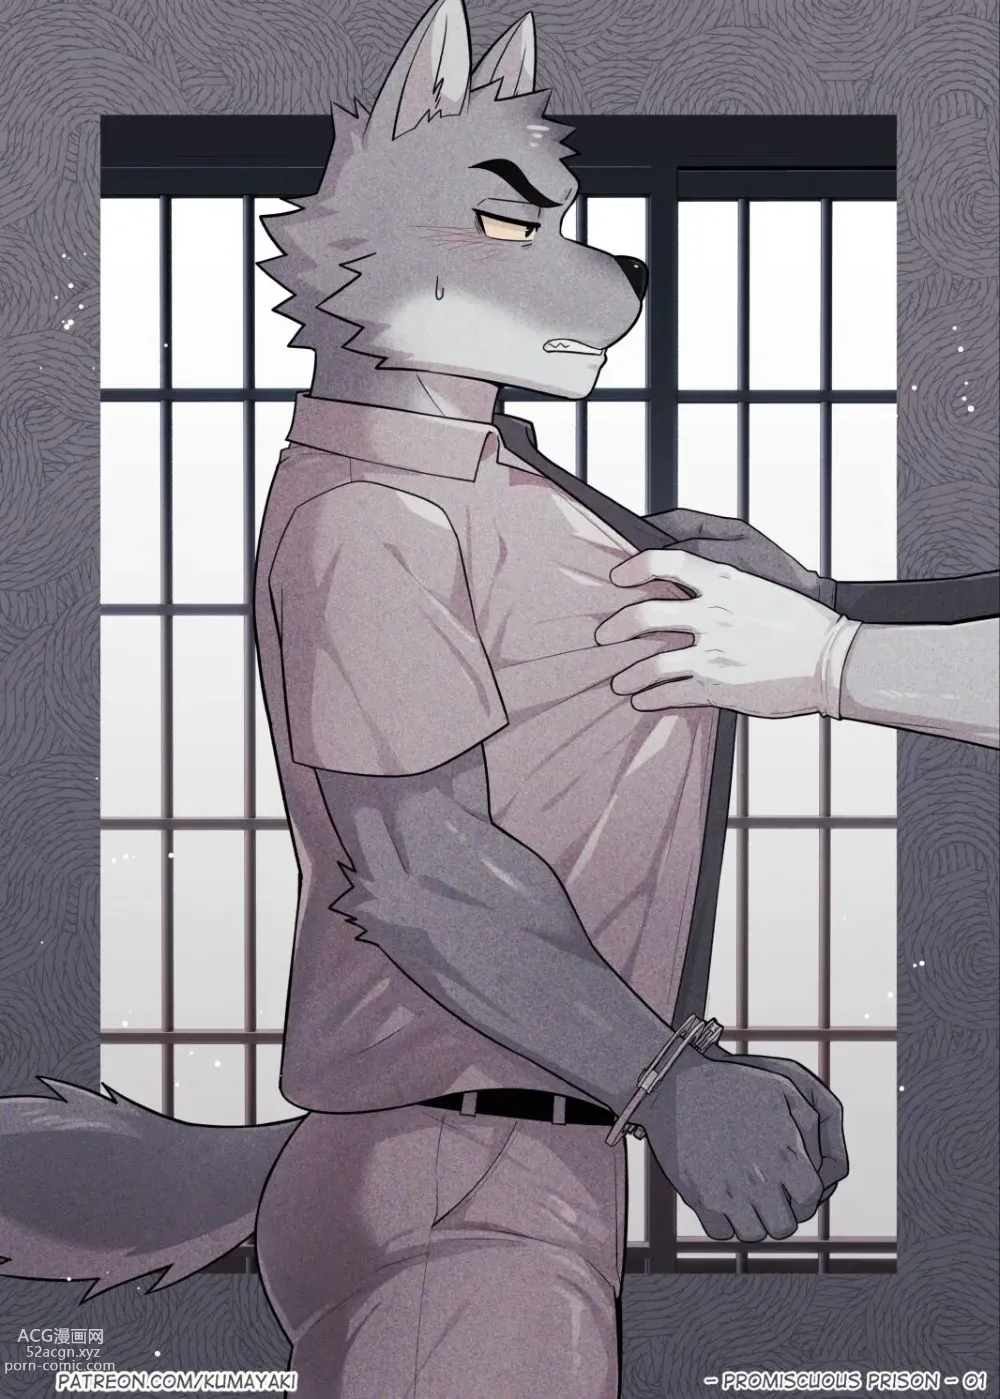 Page 3 of doujinshi Promiscuous Prison 狗大汉化 (uncensored)